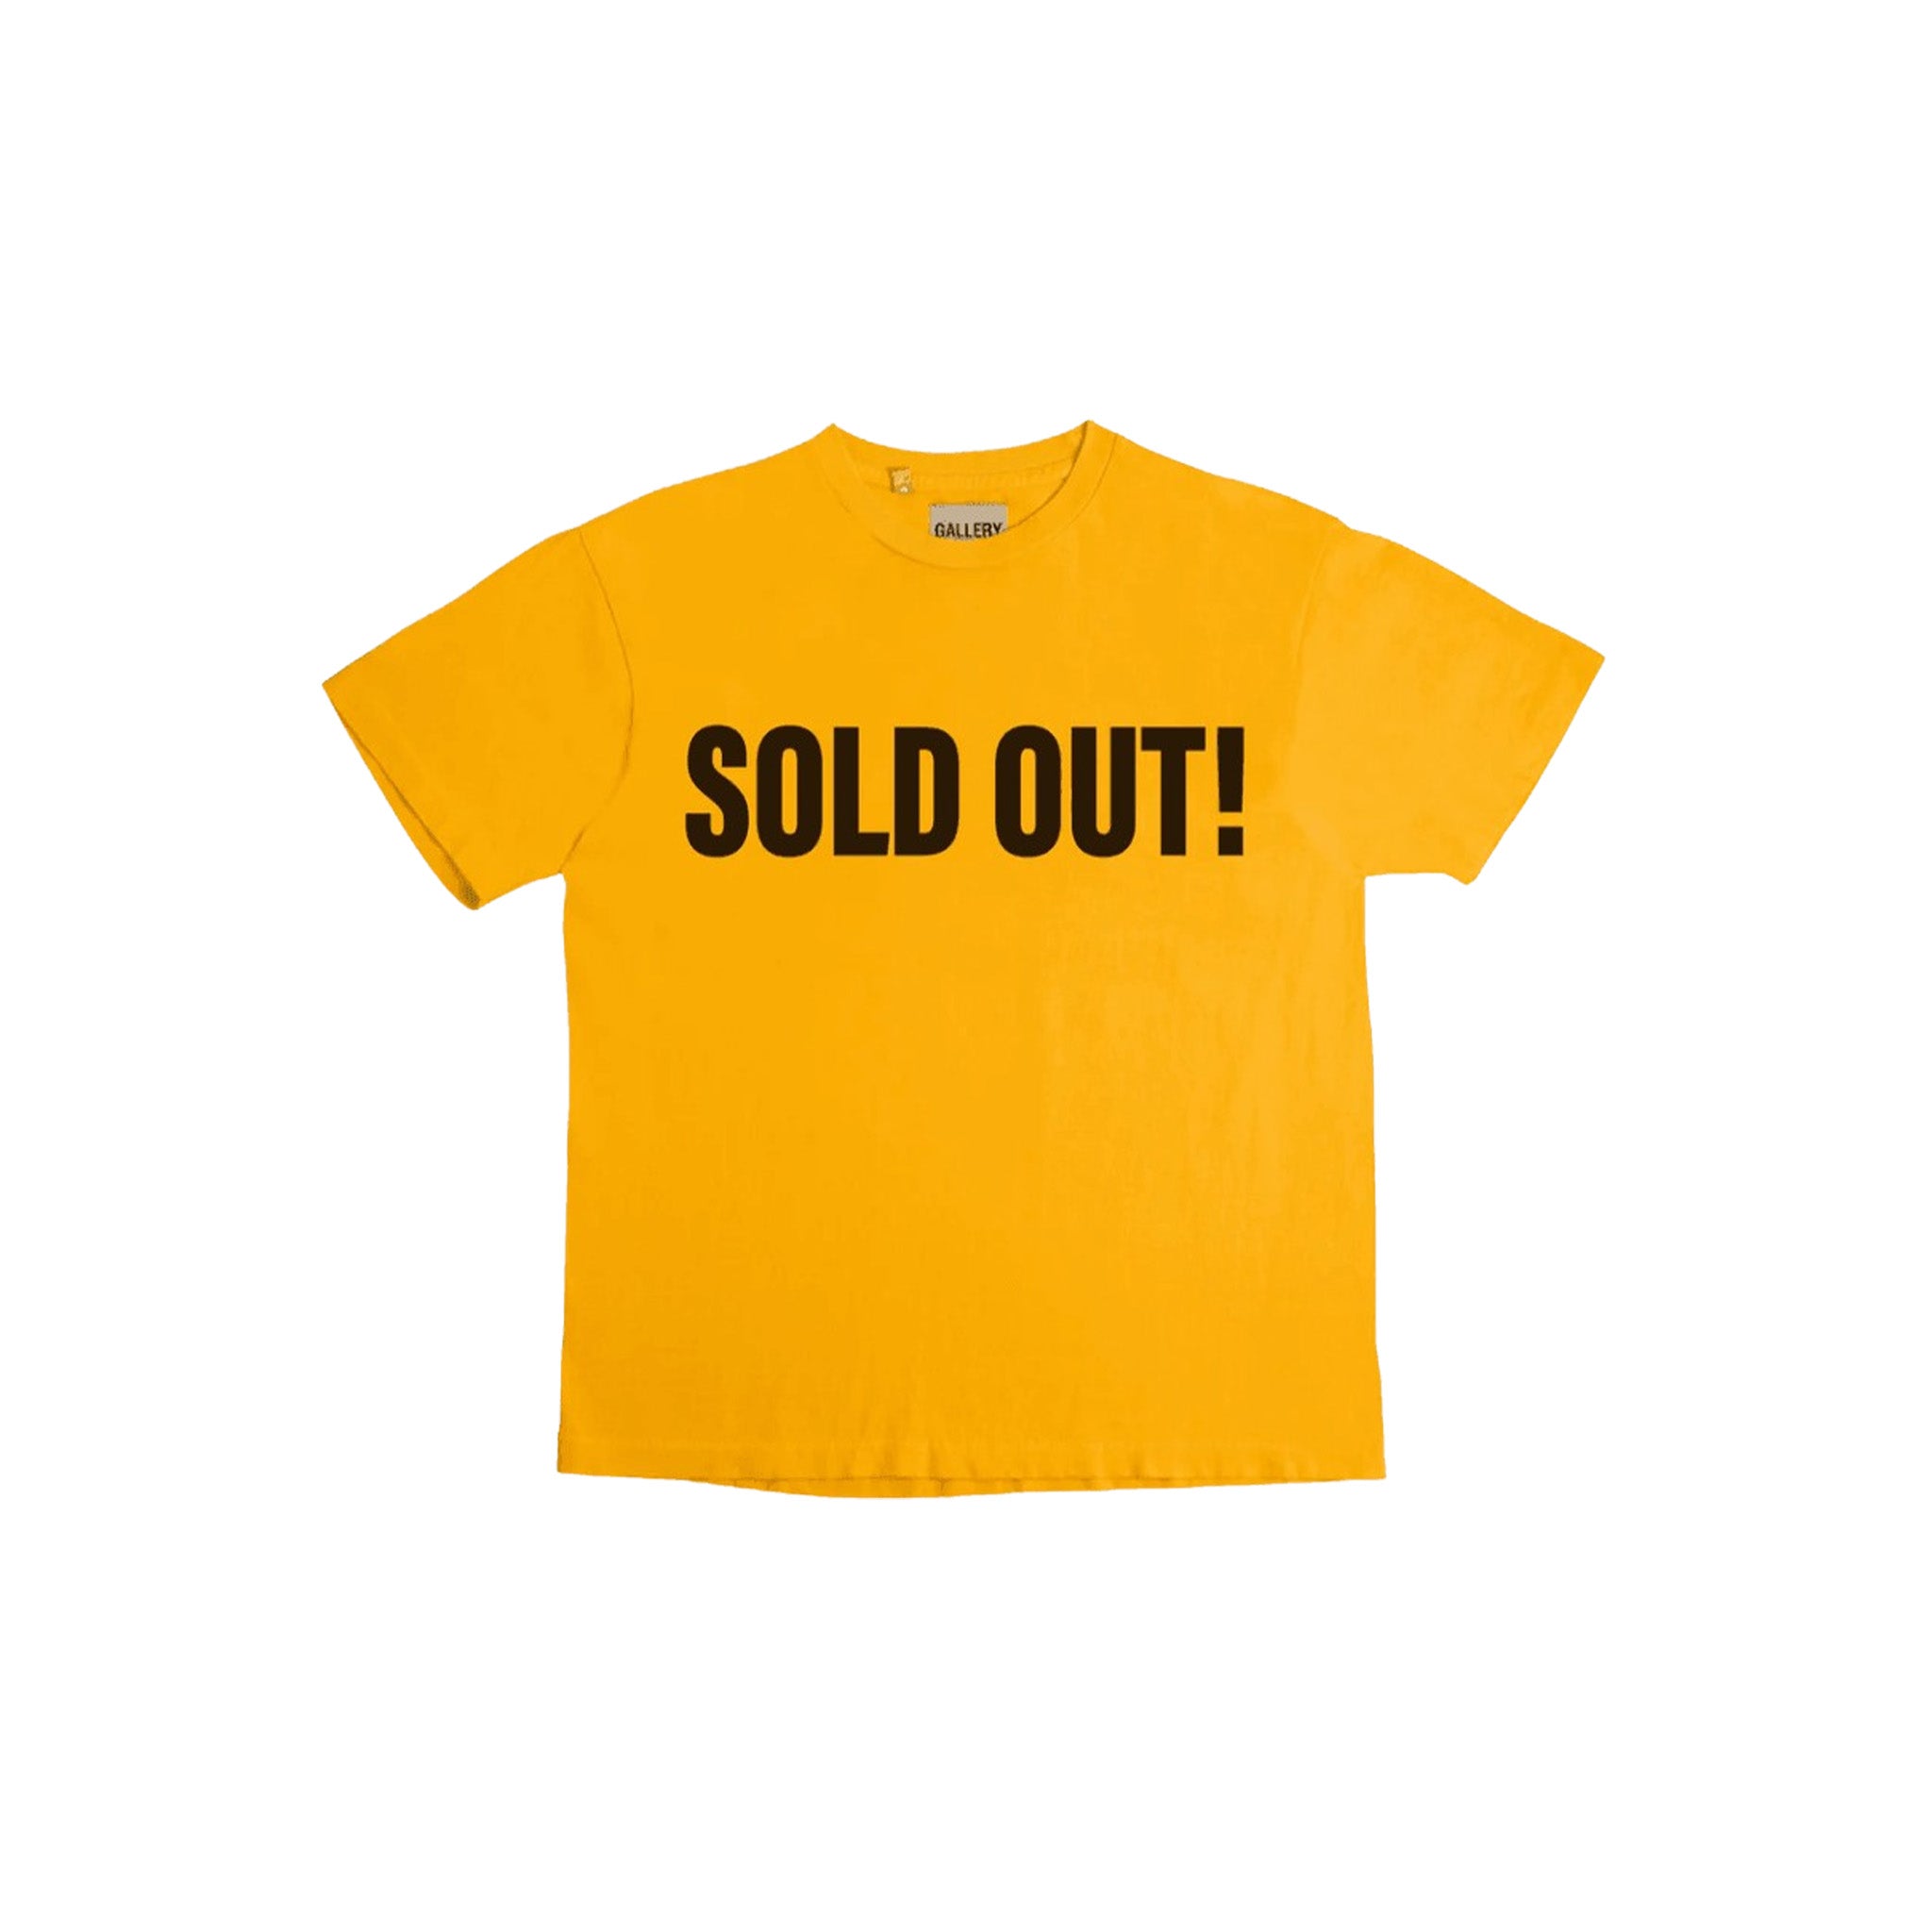 Gallery Department Sold Out T-Shirt